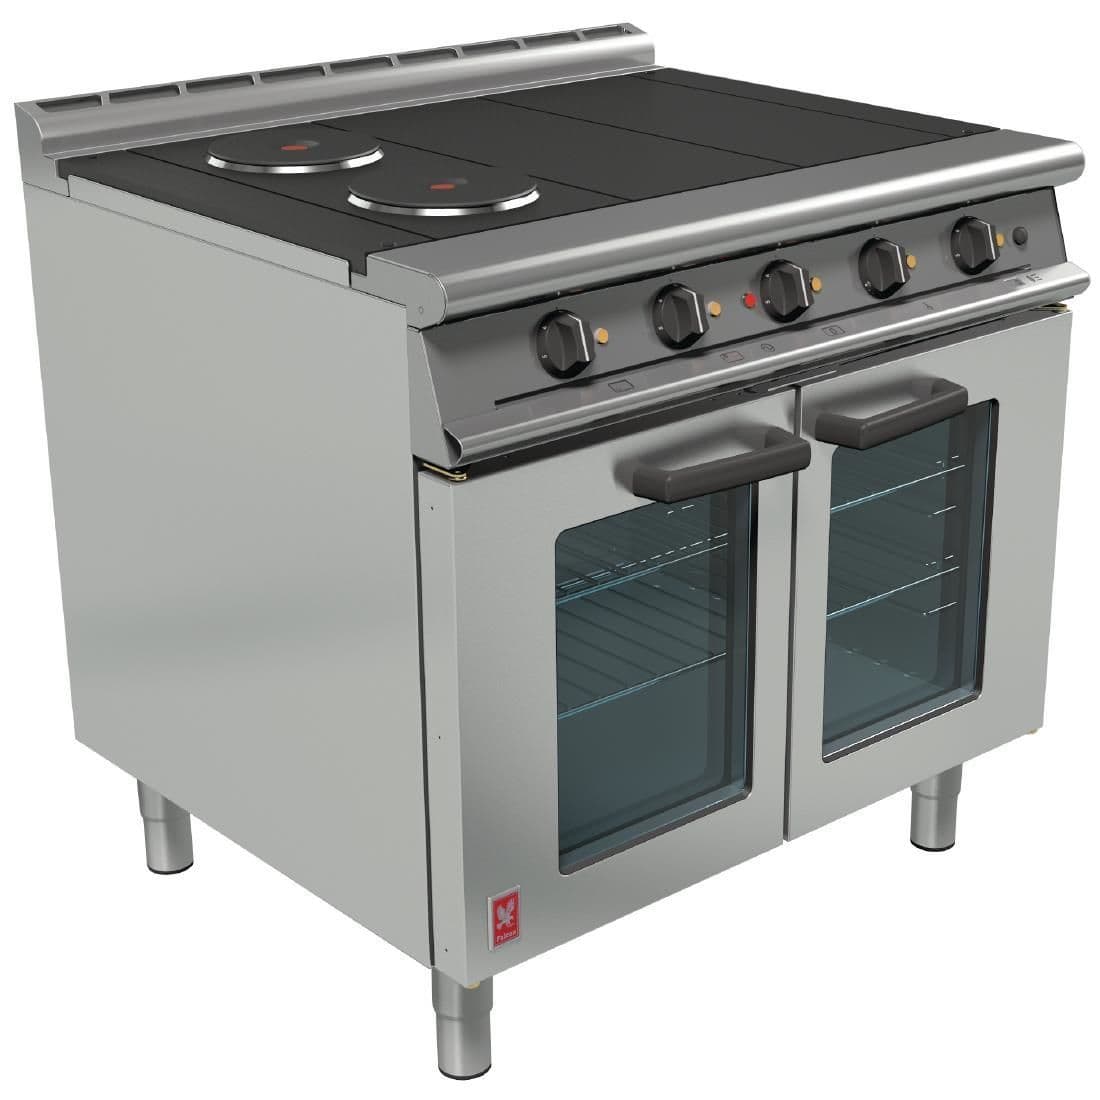 Falcon Dominator Plus 4 Hotplate Oven Range with Fan Assisted Oven E3101 OTC JD Catering Equipment Solutions Ltd